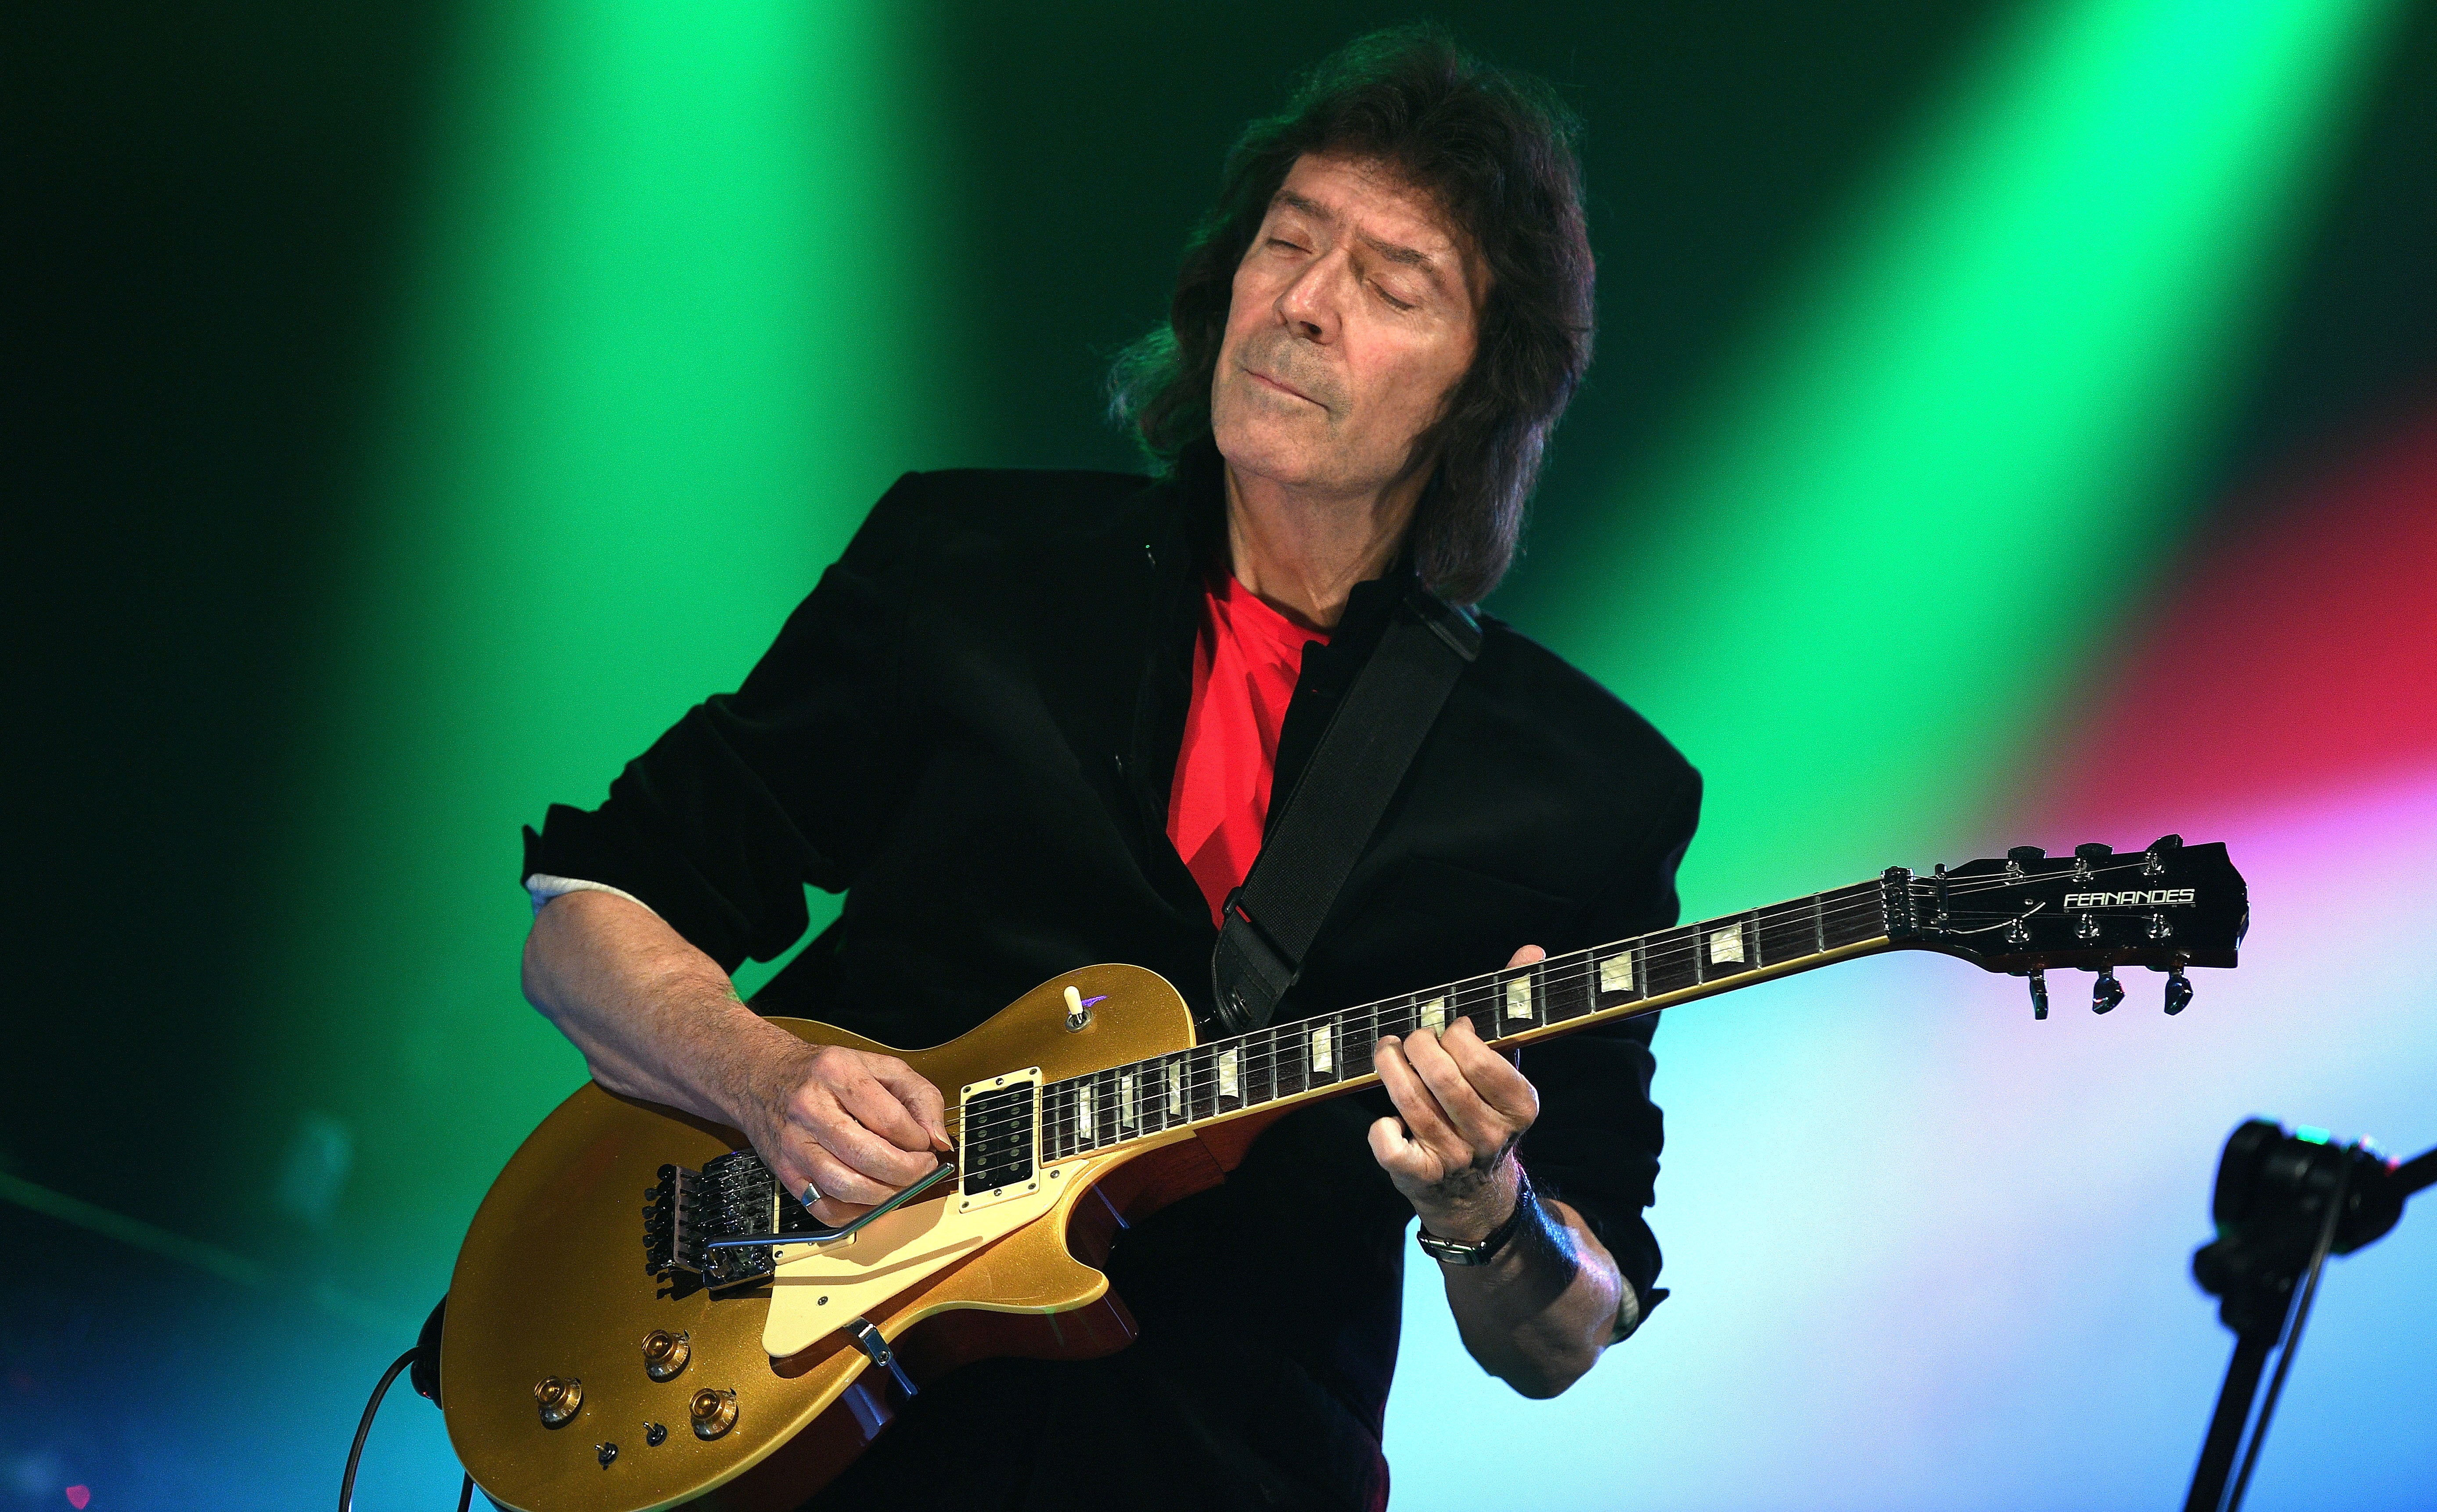 Steve Hackett - Genesis Revisited: Foxtrot at 50 & Hackett Highlights presale password for approved tickets in Peoria